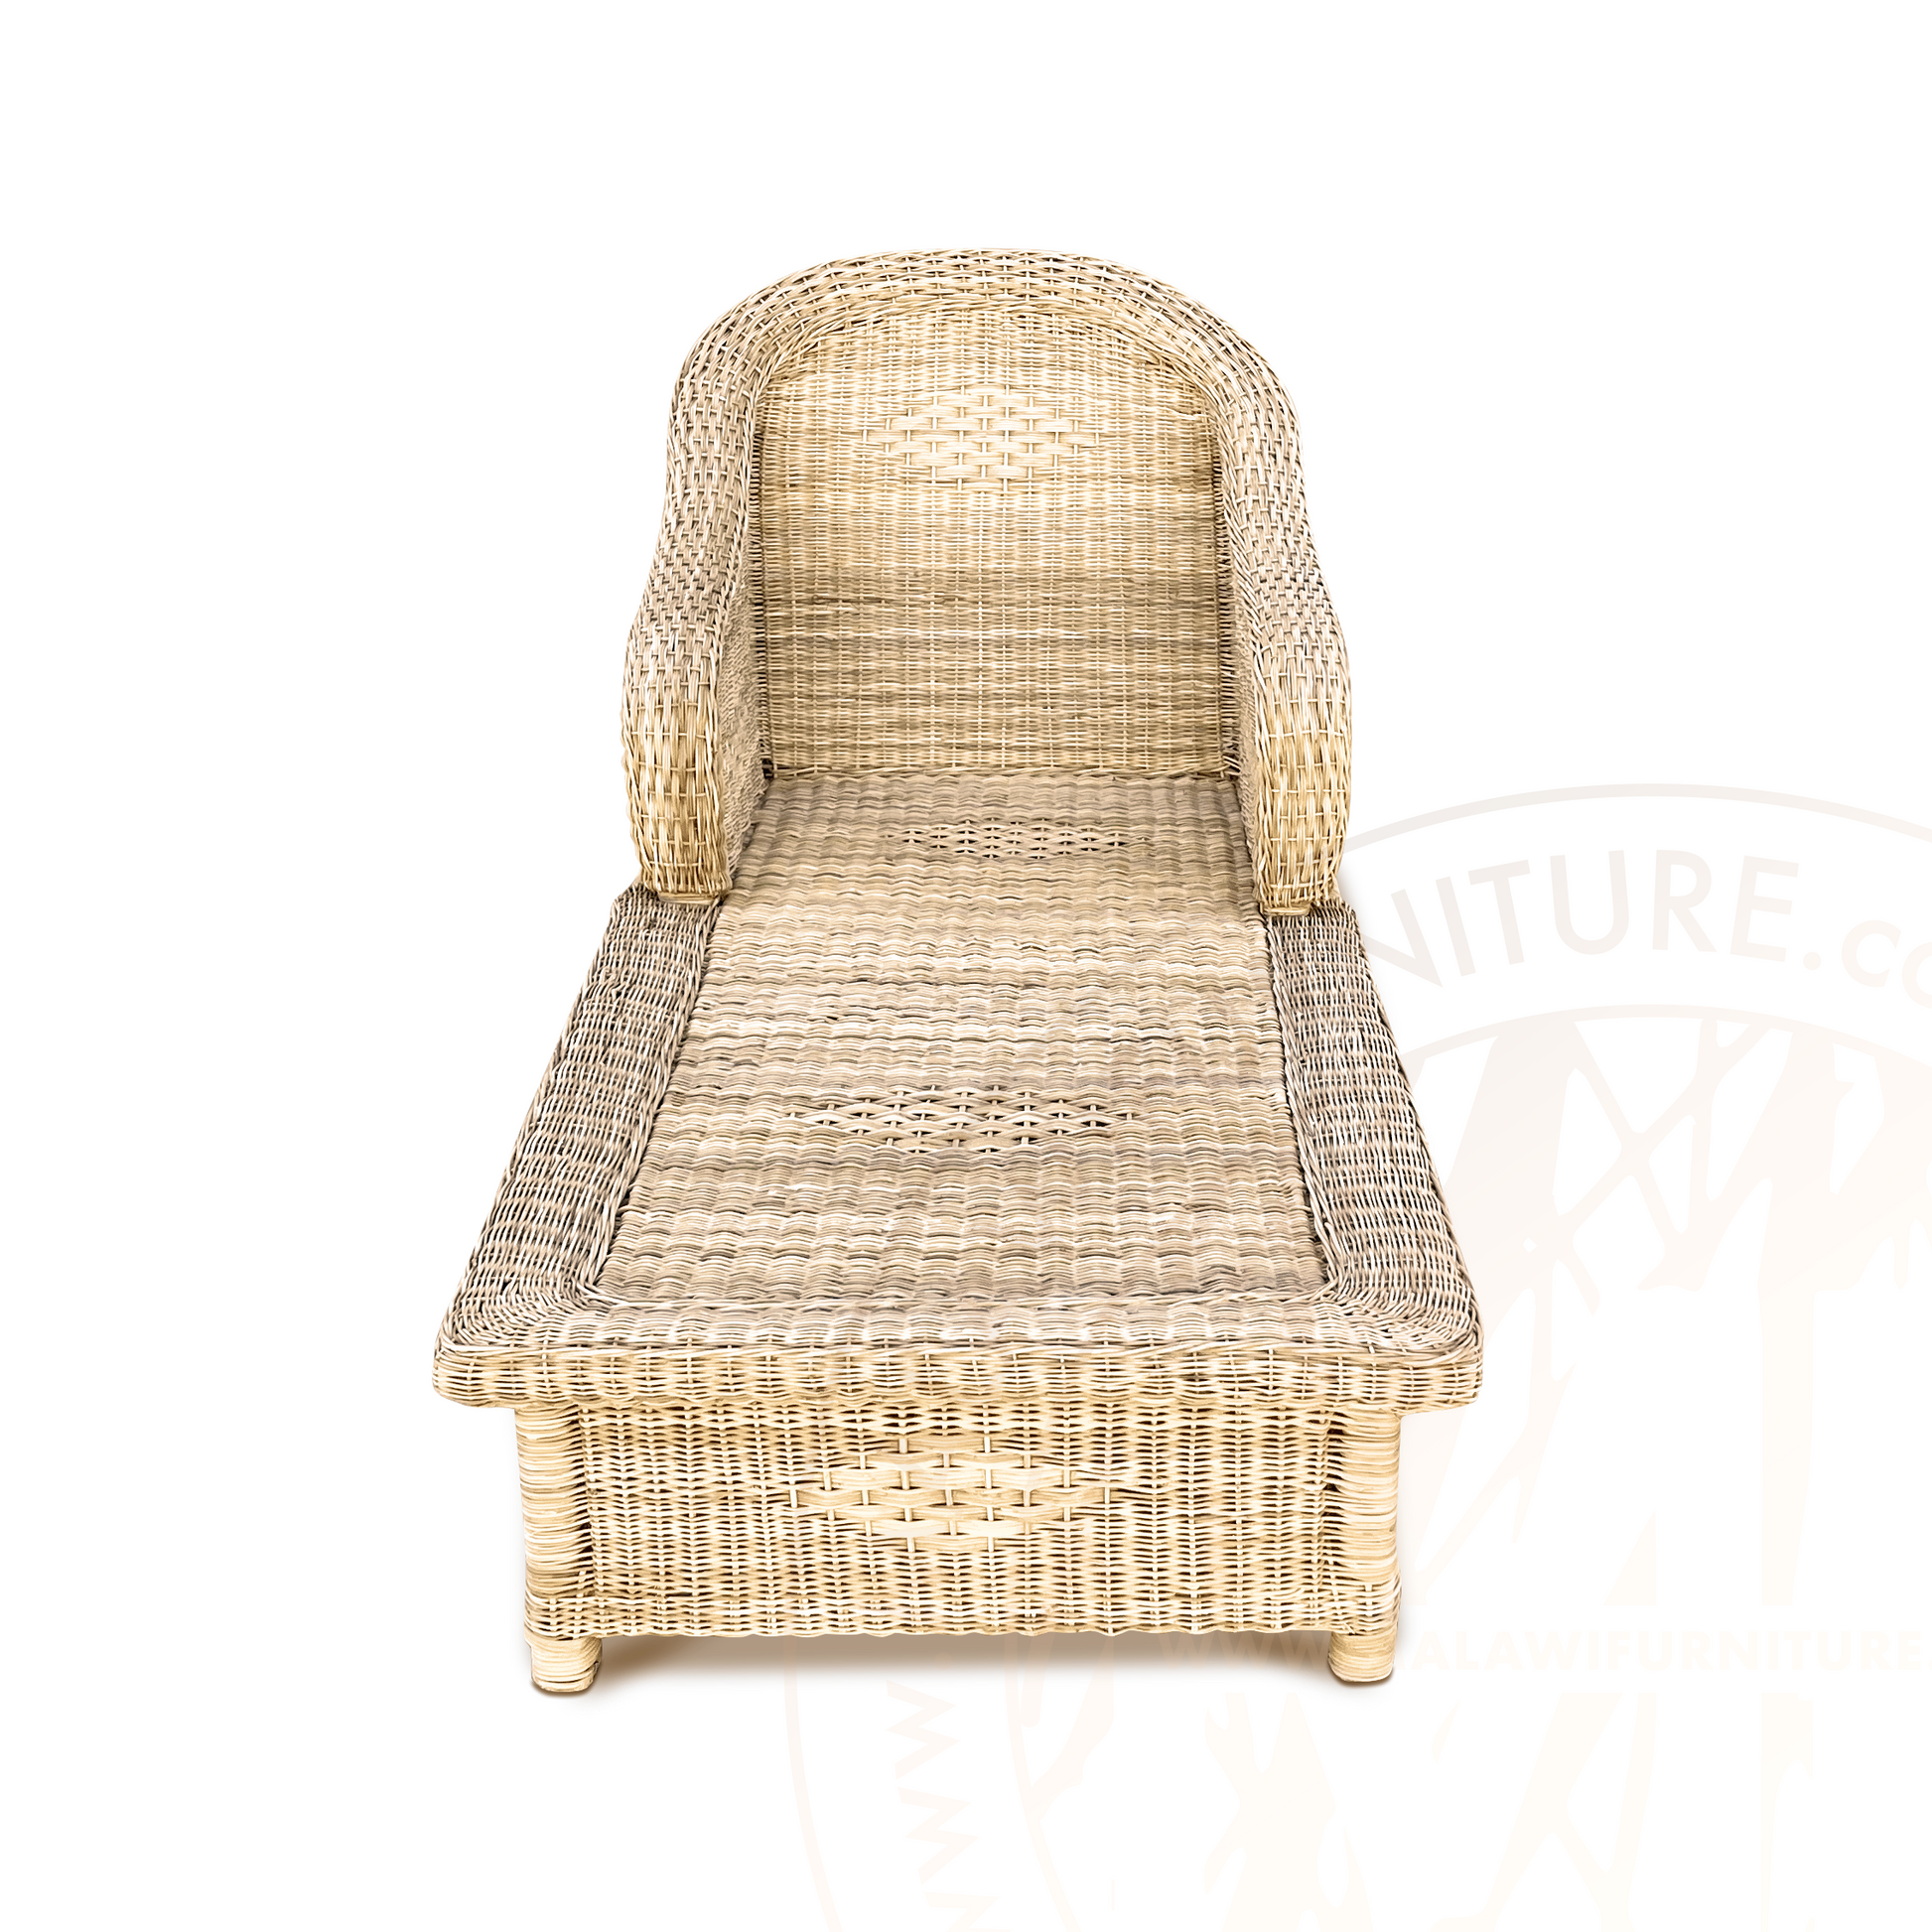 Malawi Classic Lounger outdoor patio sun bed recliner cane 